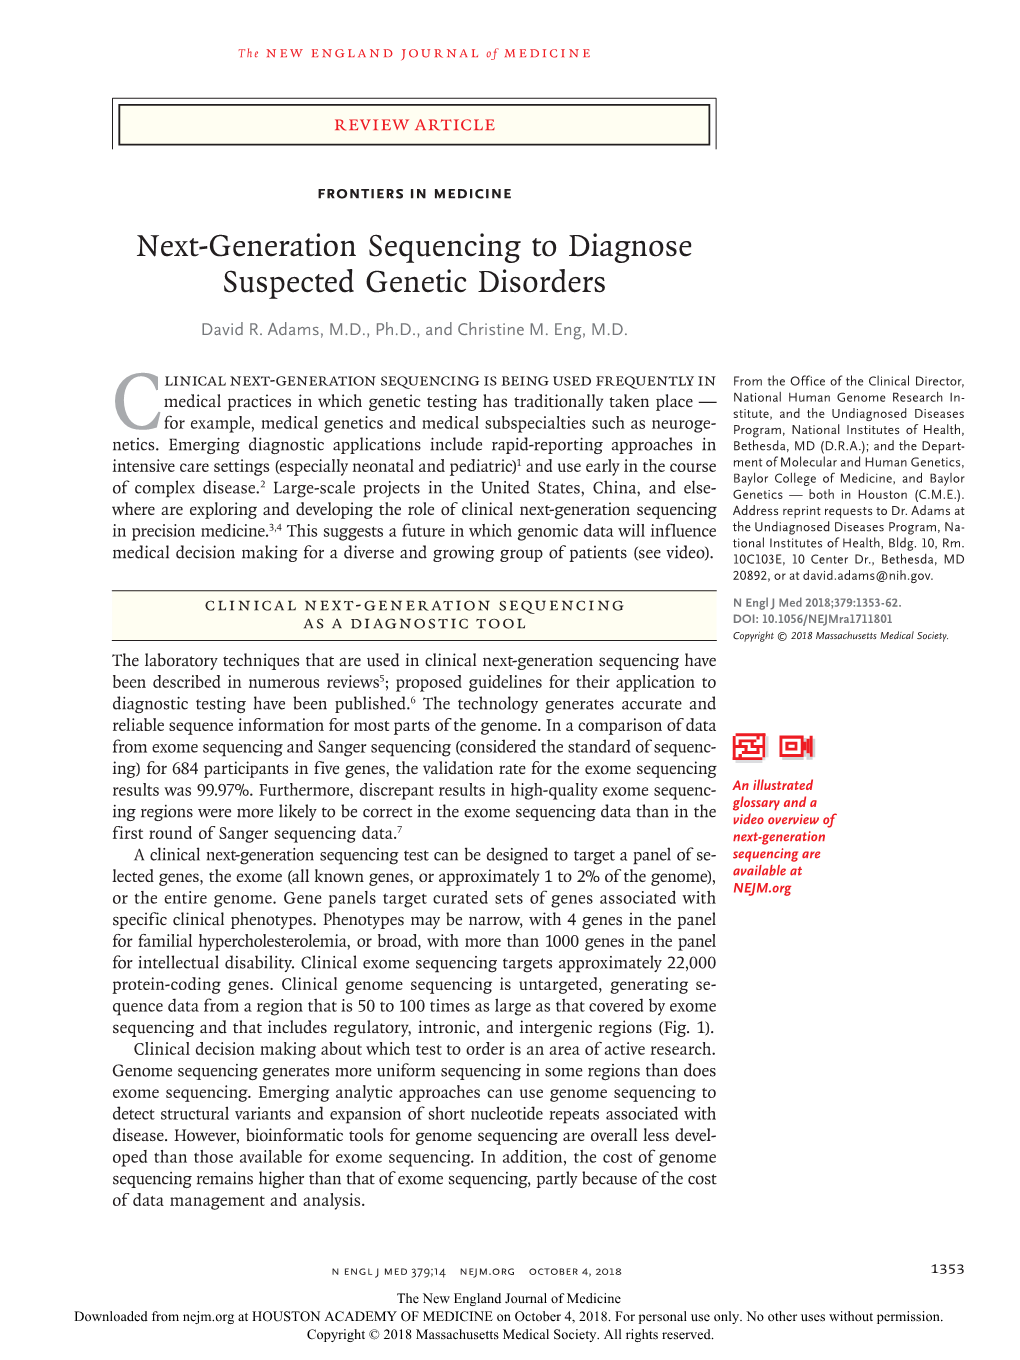 Next-Generation Sequencing to Diagnose Suspected Genetic Disorders